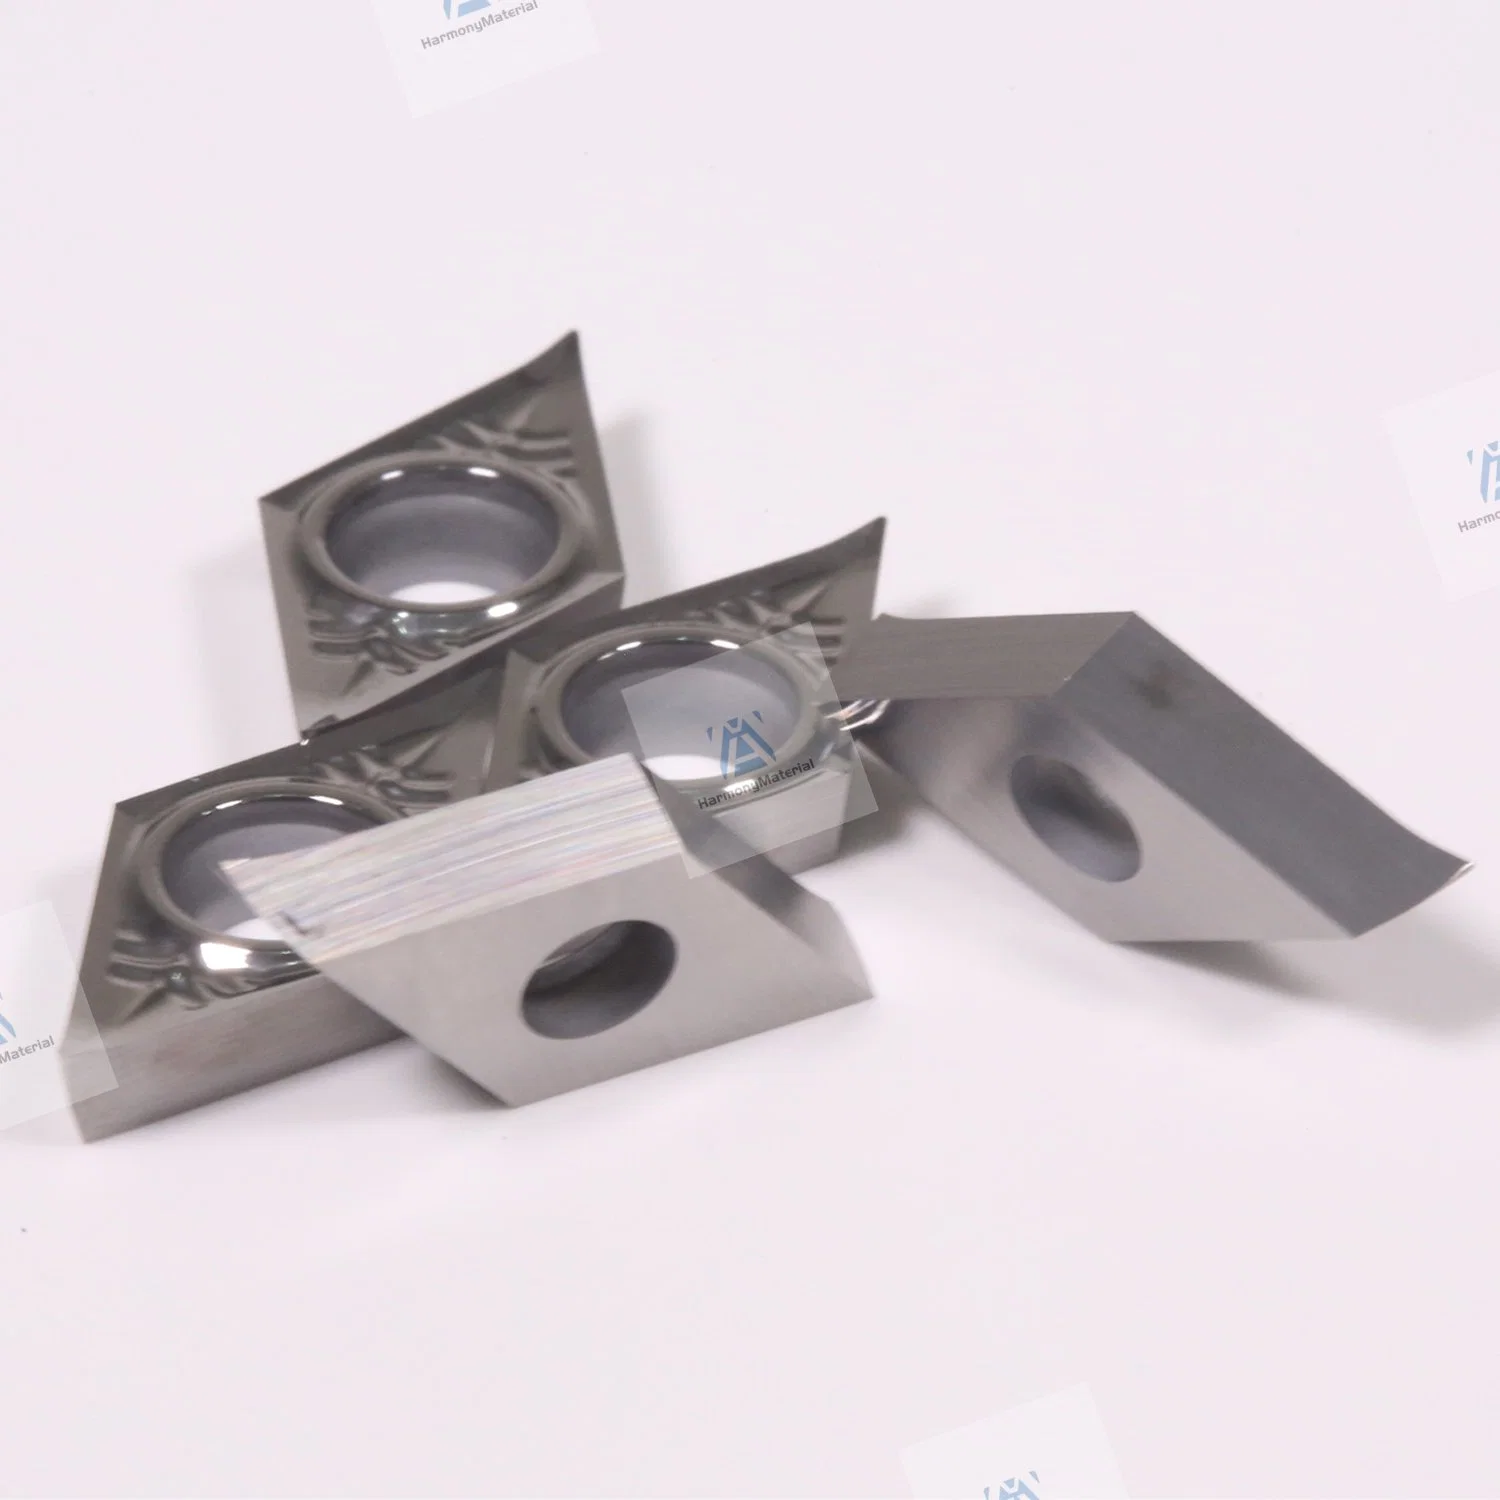 Tungsten Carbide Turning/Milling/Threading/Grooving/Drilling Wnmg Vnmg Sp300 Machine CNC Insert Carbide Cutting Tool